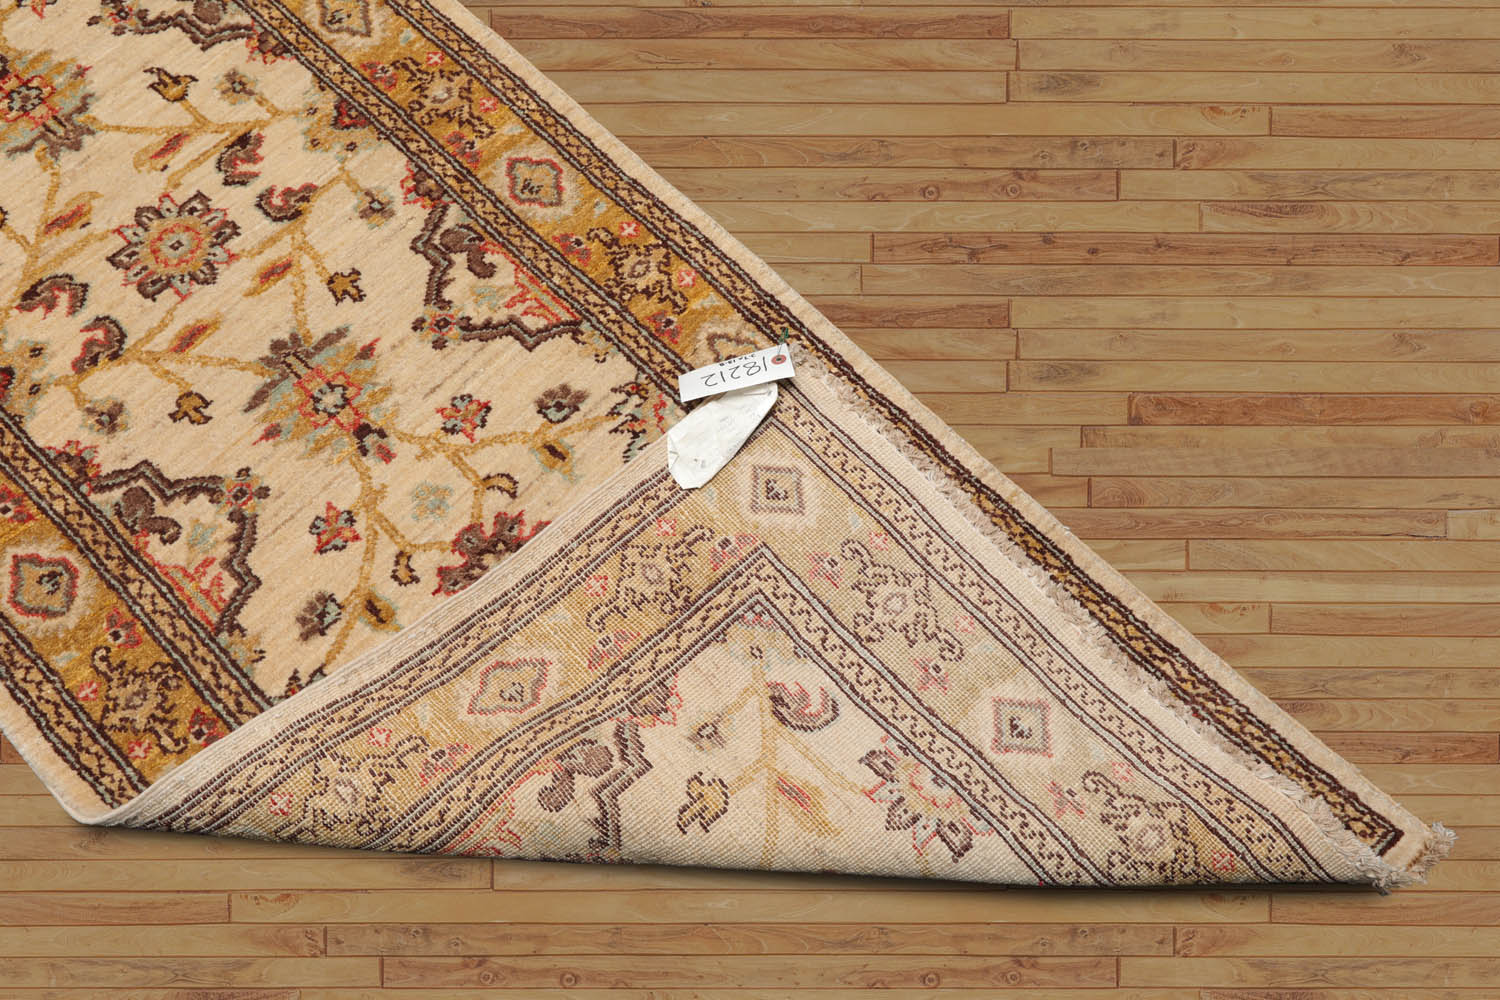 Ruqayyah Runner Hand Knotted Persian 100% Wool Chobi Peshawar Traditional Oriental Area Rug Beige, Gold Color